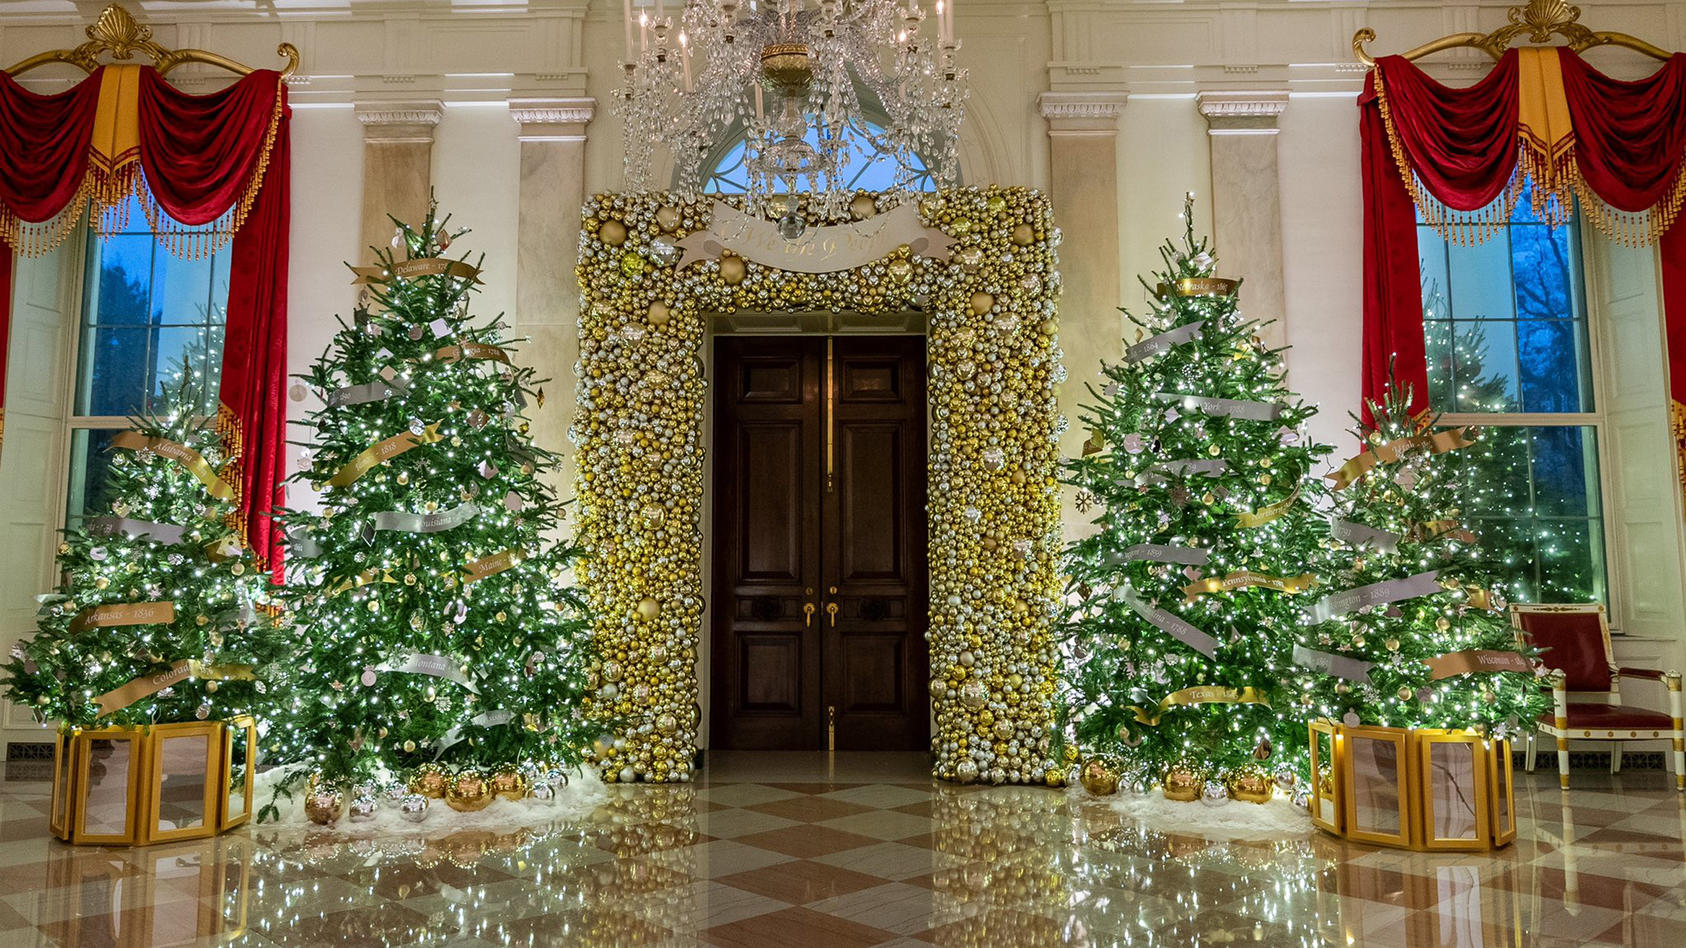 November 28, 2022, Washington, District Of Columbia, USA: Holiday decorations in the Grand Foyer are seen at the White House in Washington. The First Family is celebrating their fourth Christmas in the White House. The theme of this year is 'We the P